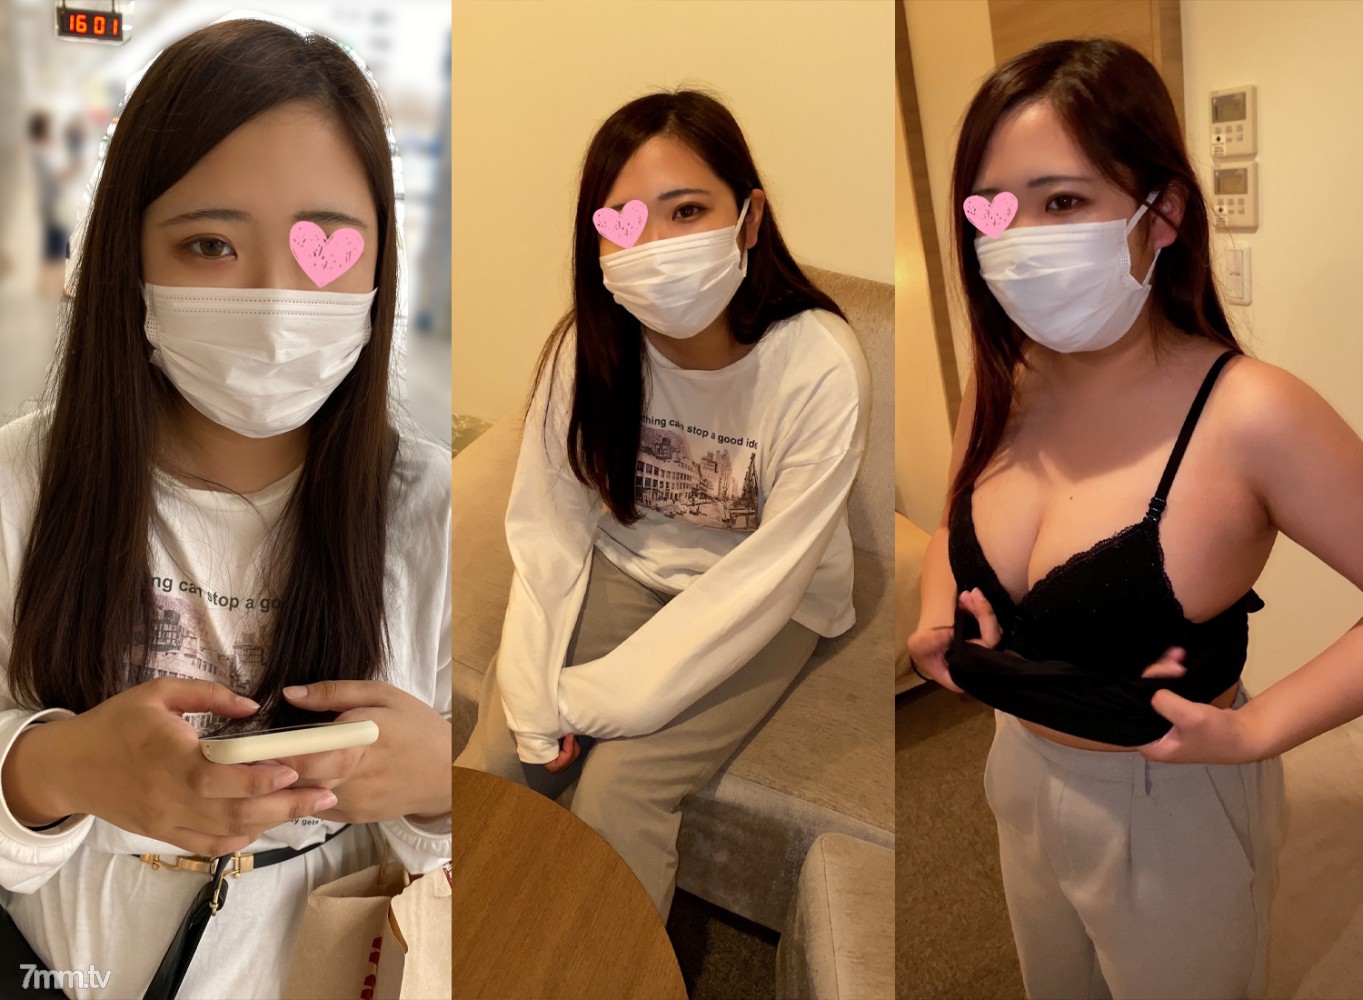 fc2-ppv 2118991 Personal Shooting F-cup 18-year-old Professional Student Living In Shizuoka Prefecture Live Sex and Handjob Bukkake For Money Want Total 2 Hours Recording FC2-PPV-2118991 - fc2-ppv 2118991 - 7mmtv.sx